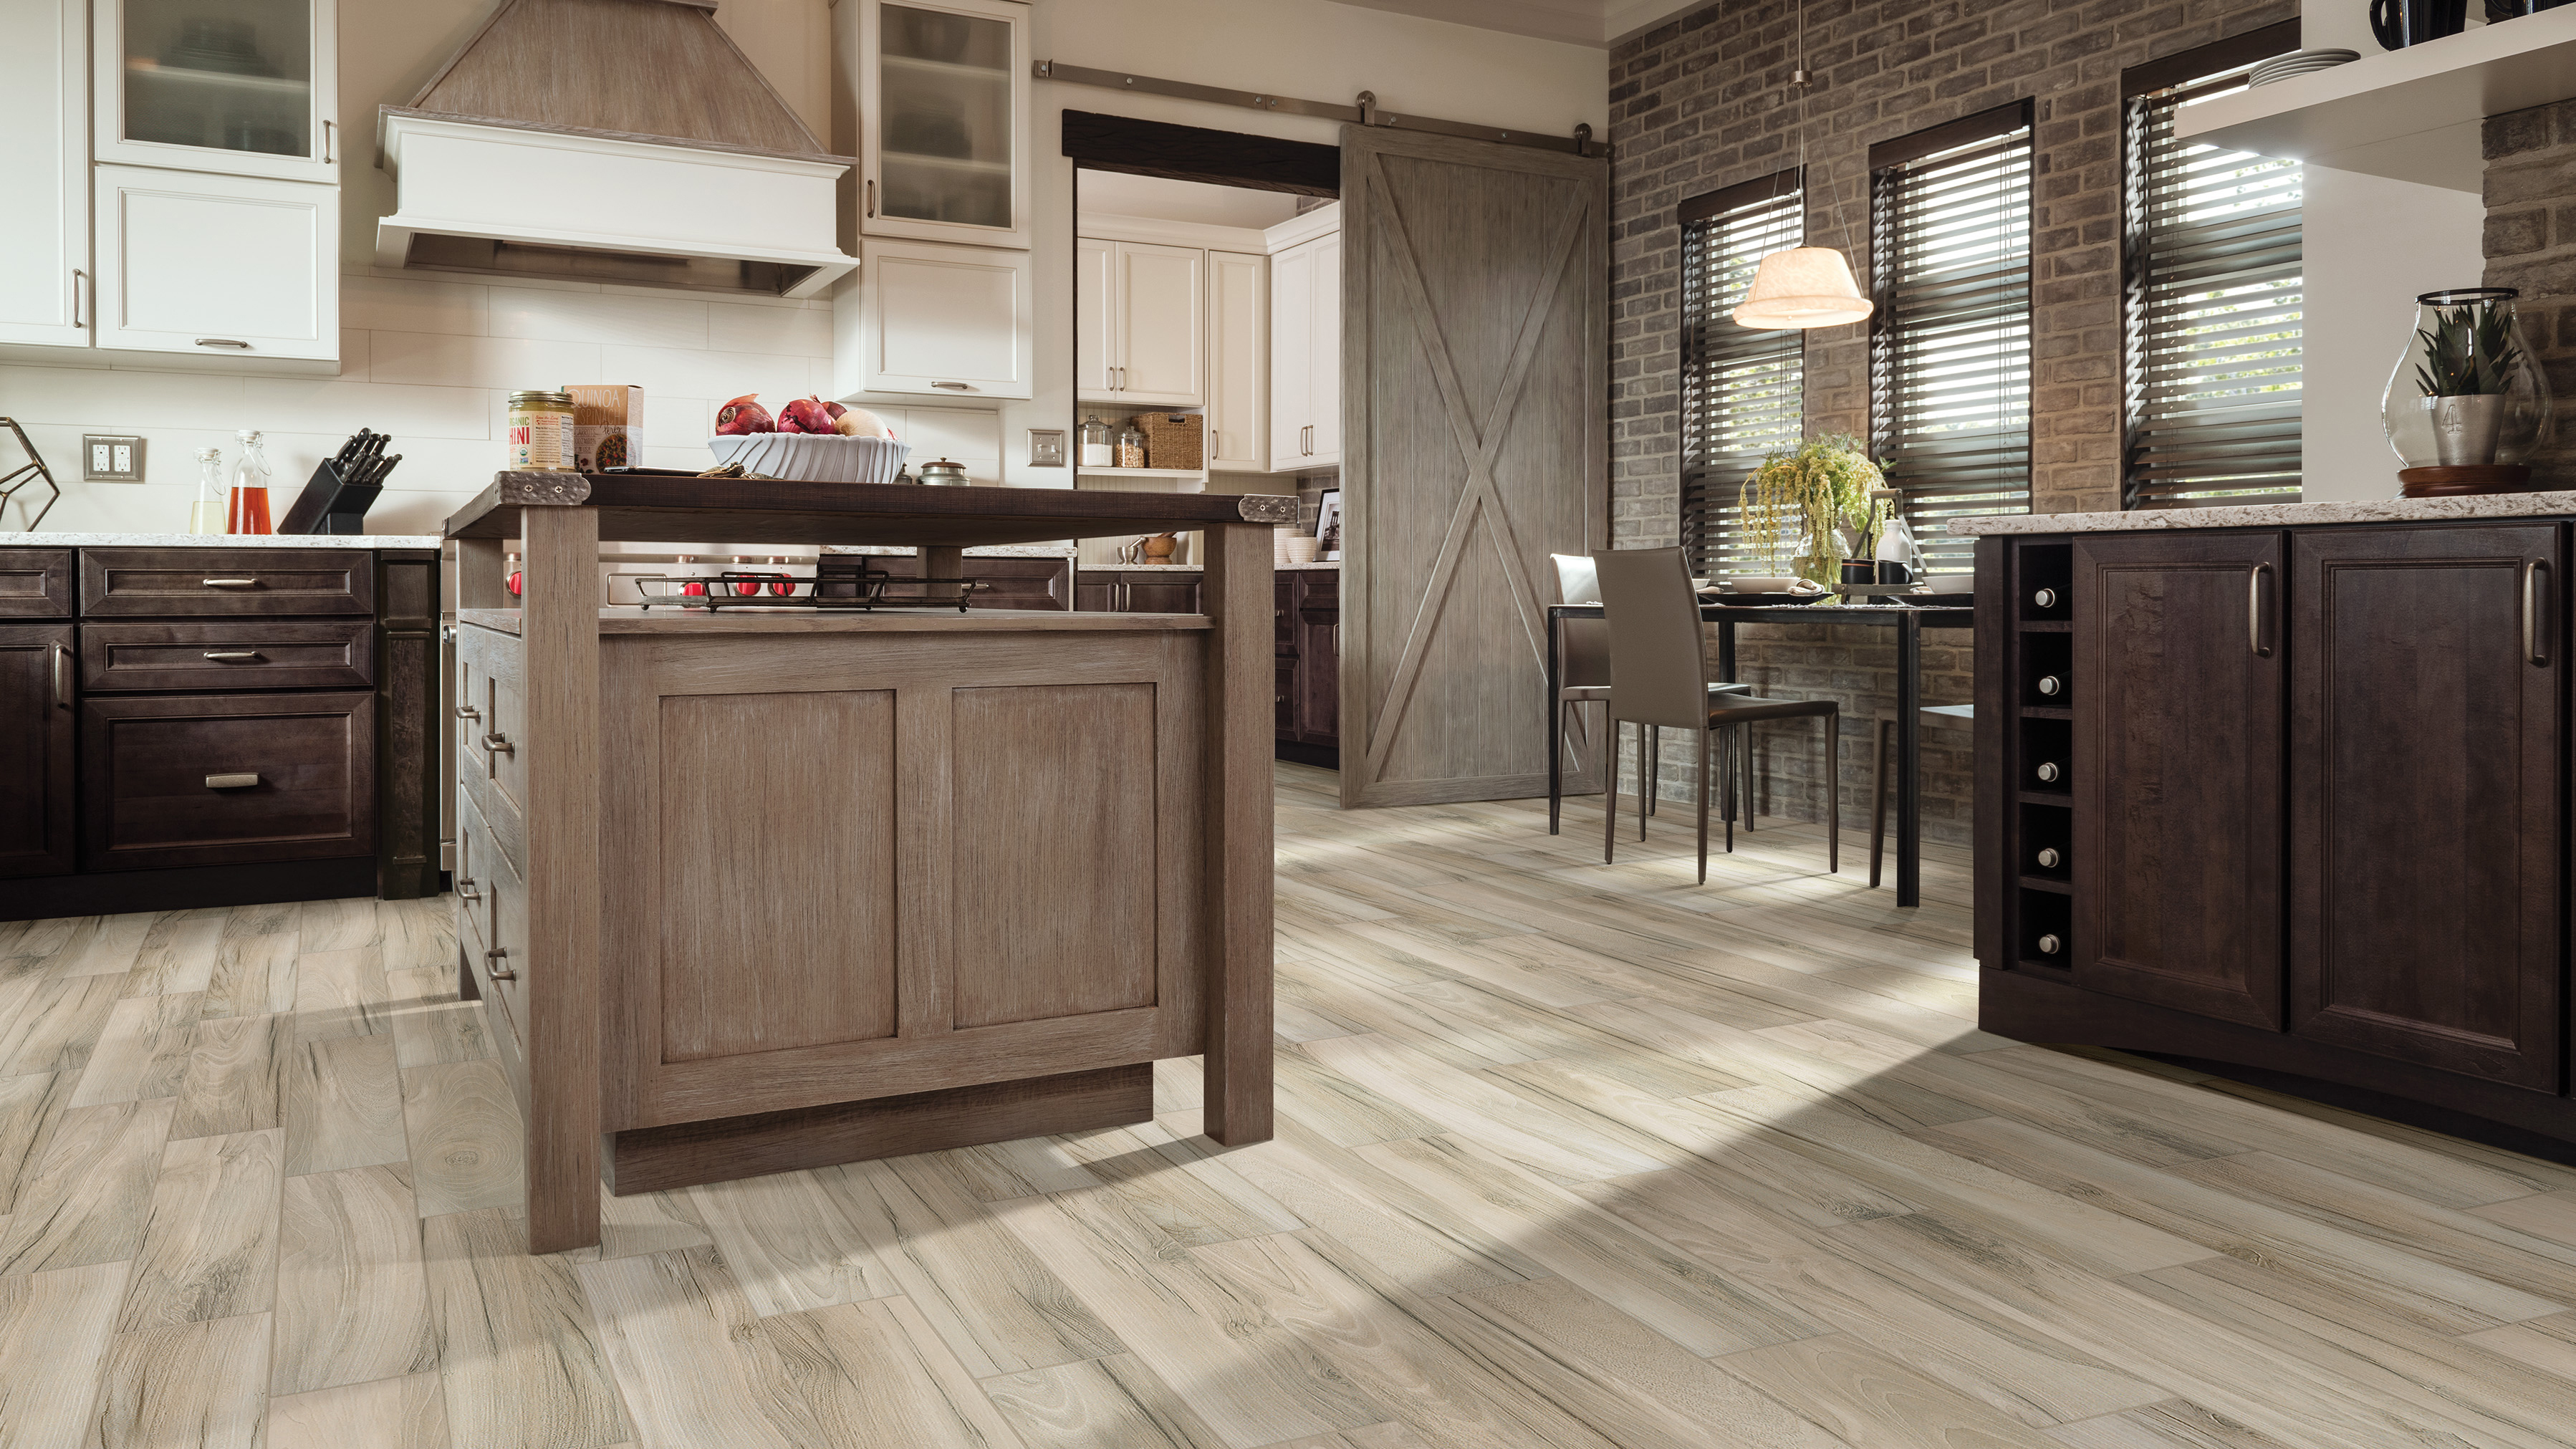 Wood-look tile floors in a kitchen.